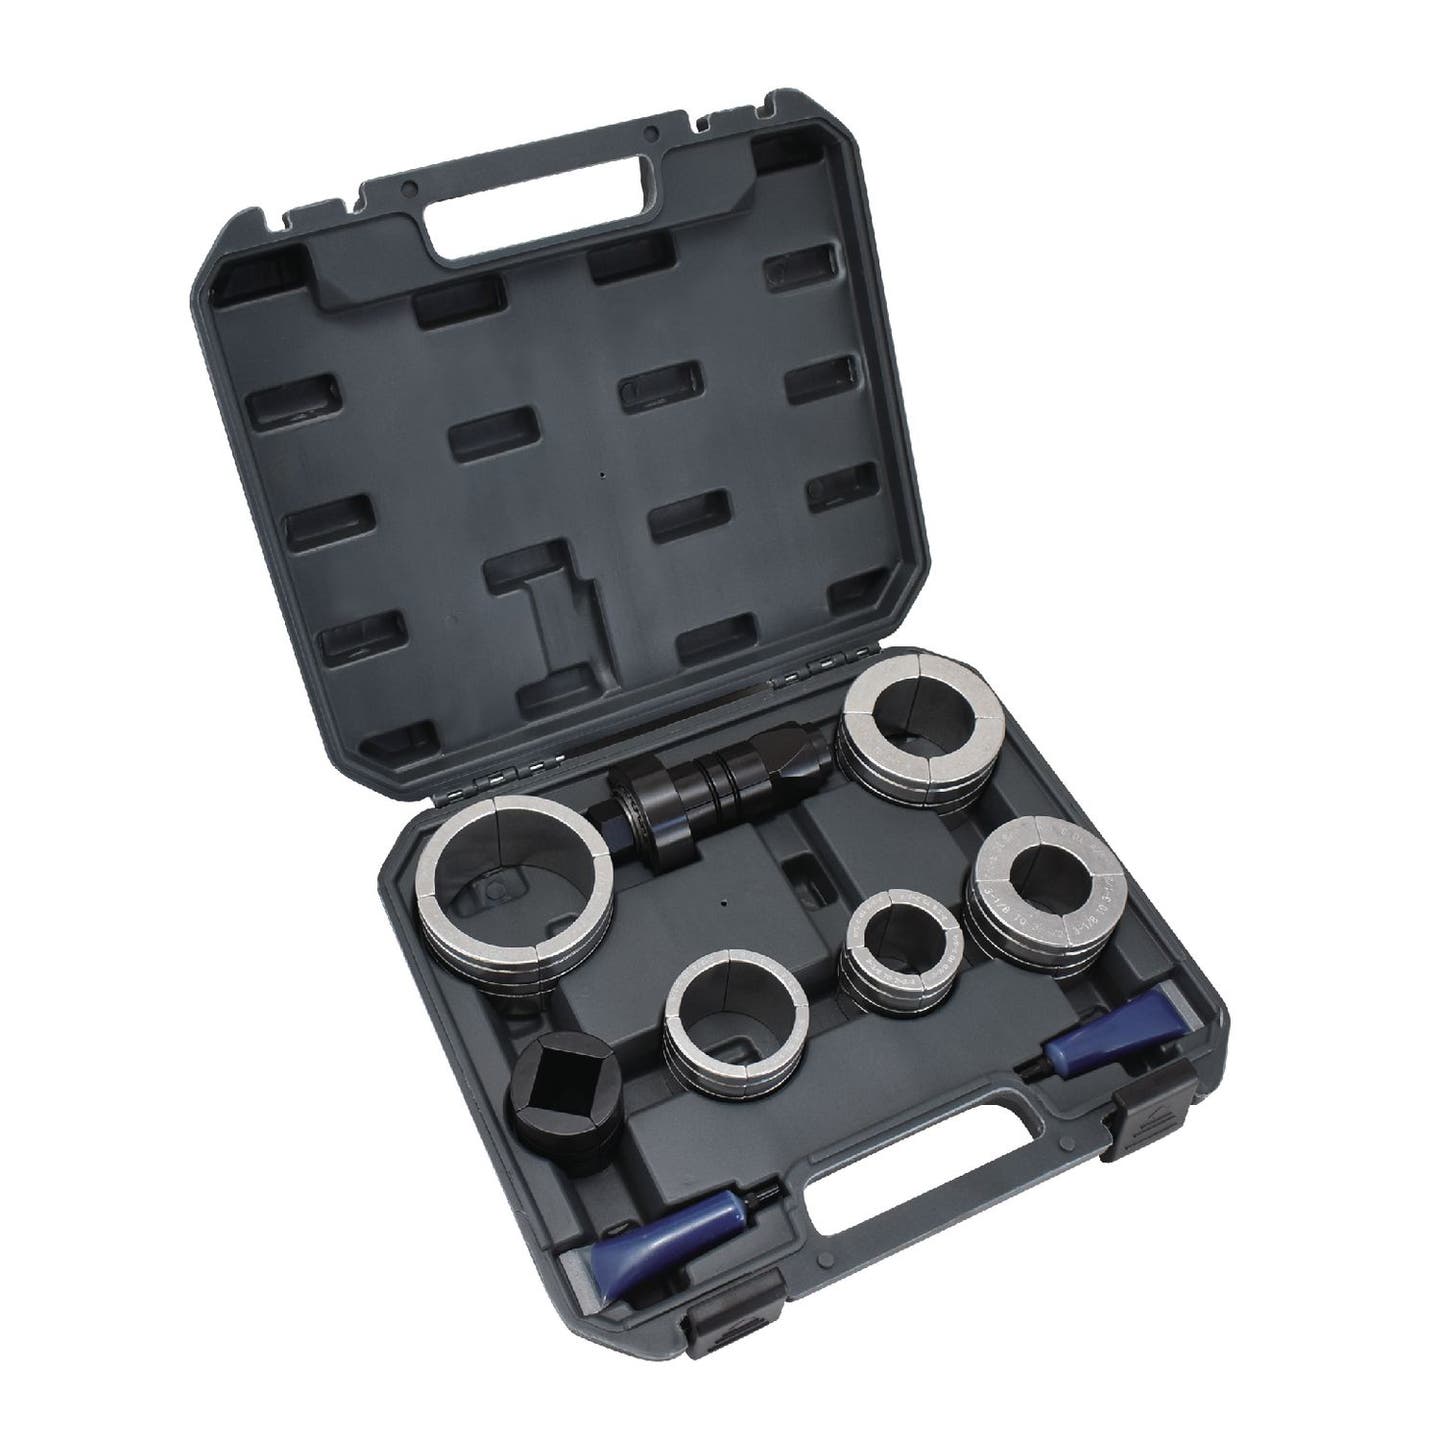 EXHAUST PIPE EXPANDER KIT